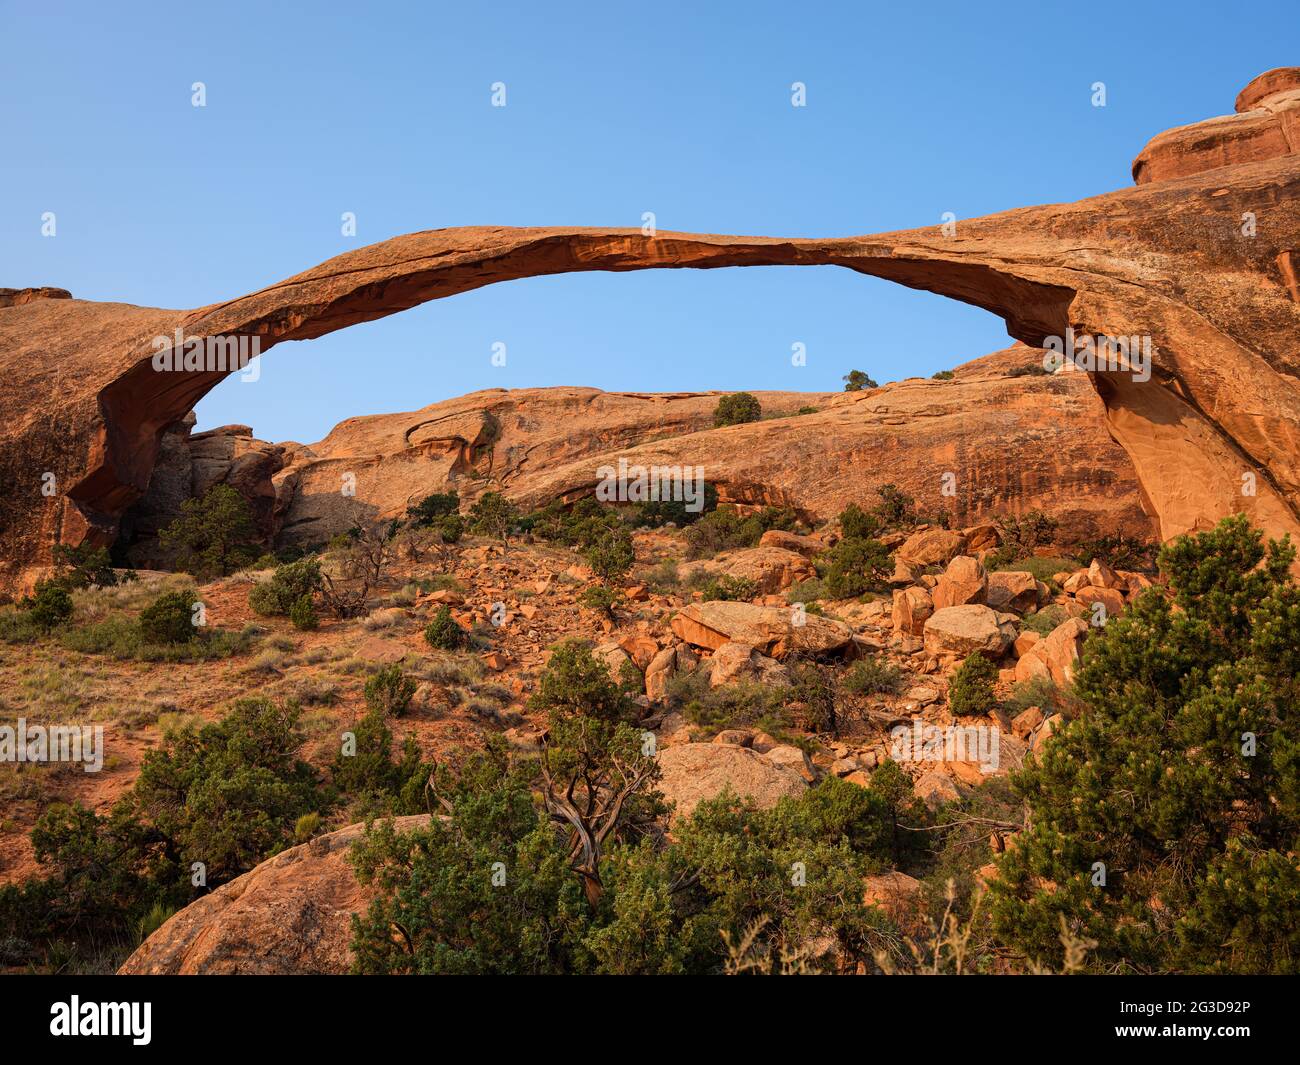 ARCHES NATIONAL PARK, UTAH - CIRCA AUGUST 2020: Landscape Arch in Arches National Park. This is the longest of the many natural rock arches located in Stock Photo